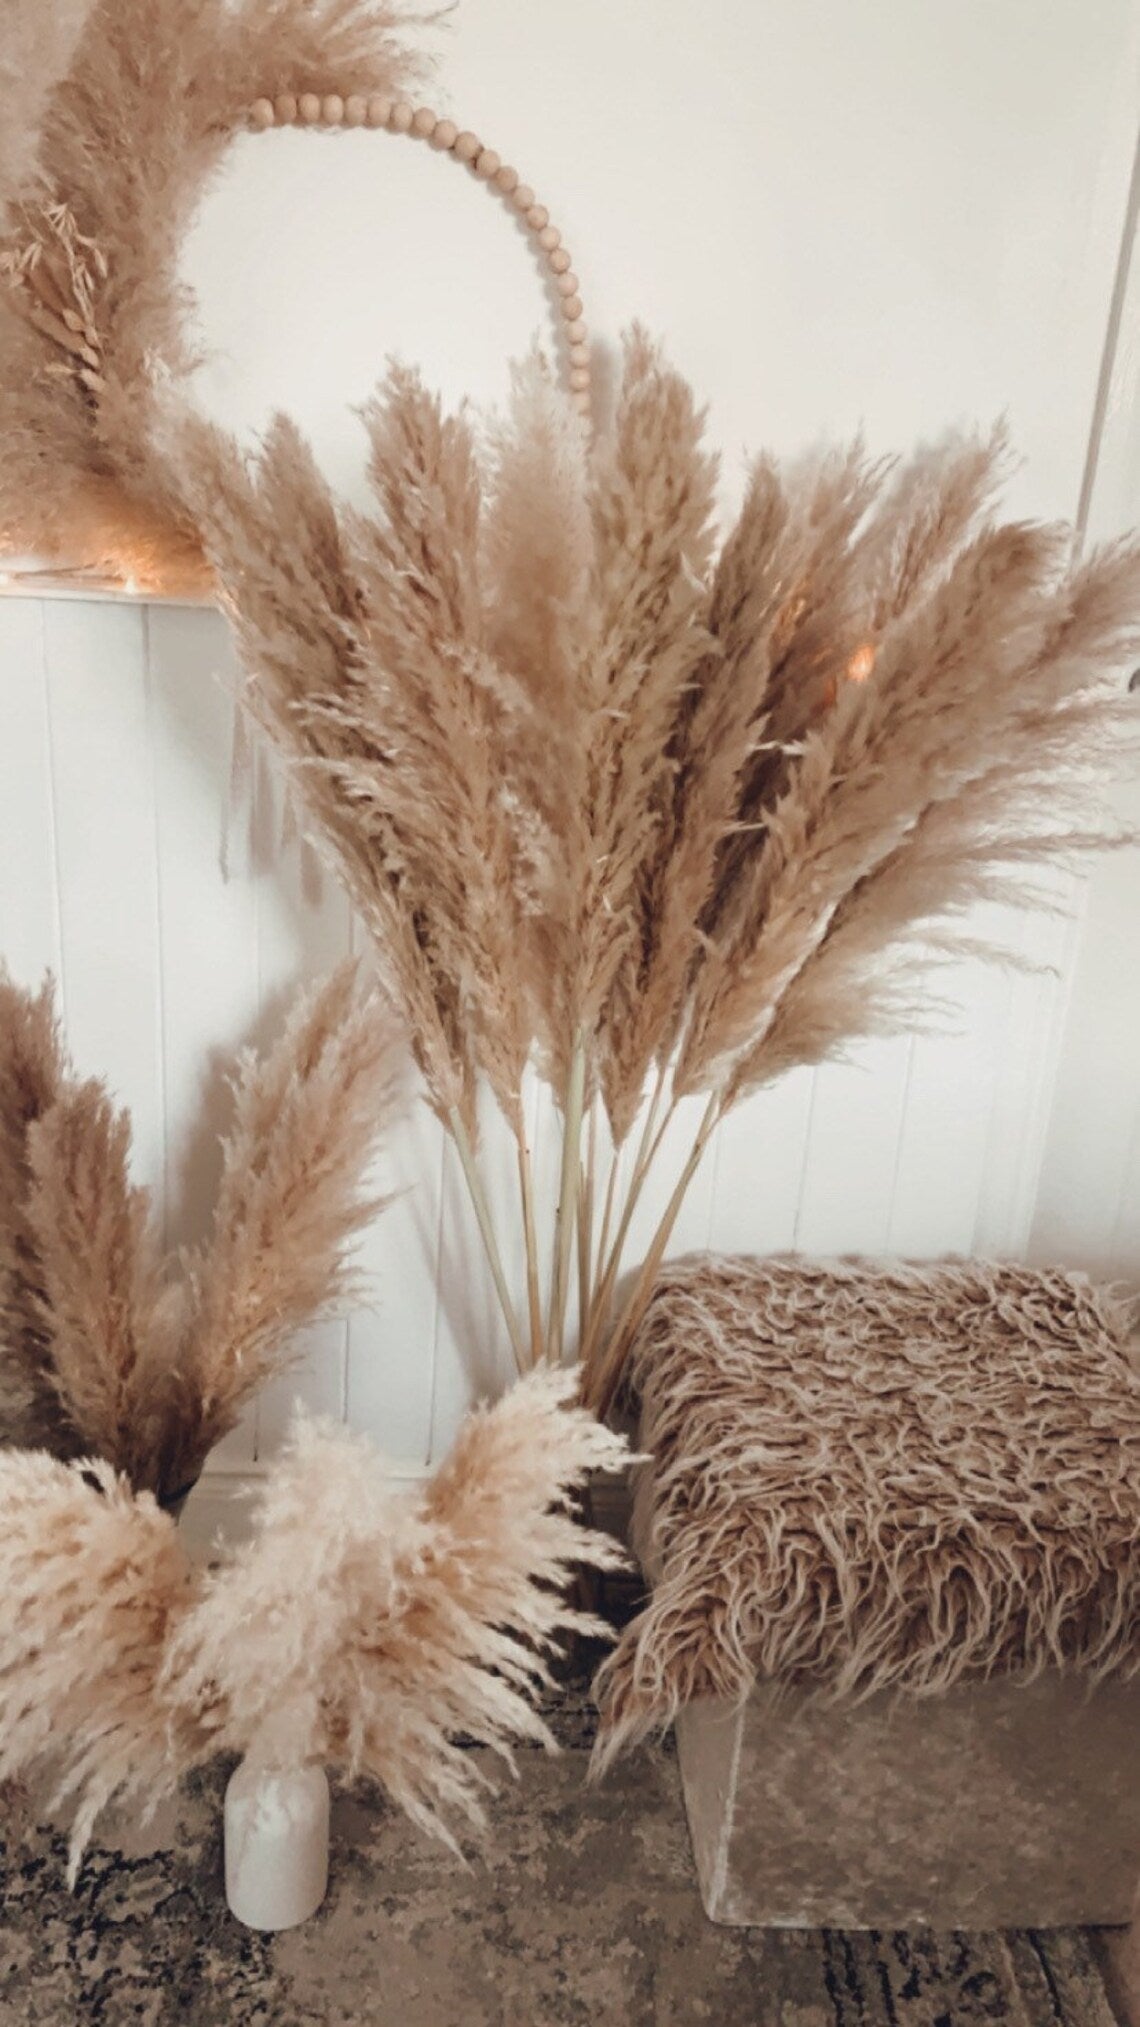 Sale extra large cream fluffy natural pampas grass 60-120cm/ pampas bouquet , gift for her,  gift UK, dried flowers, pampass grass